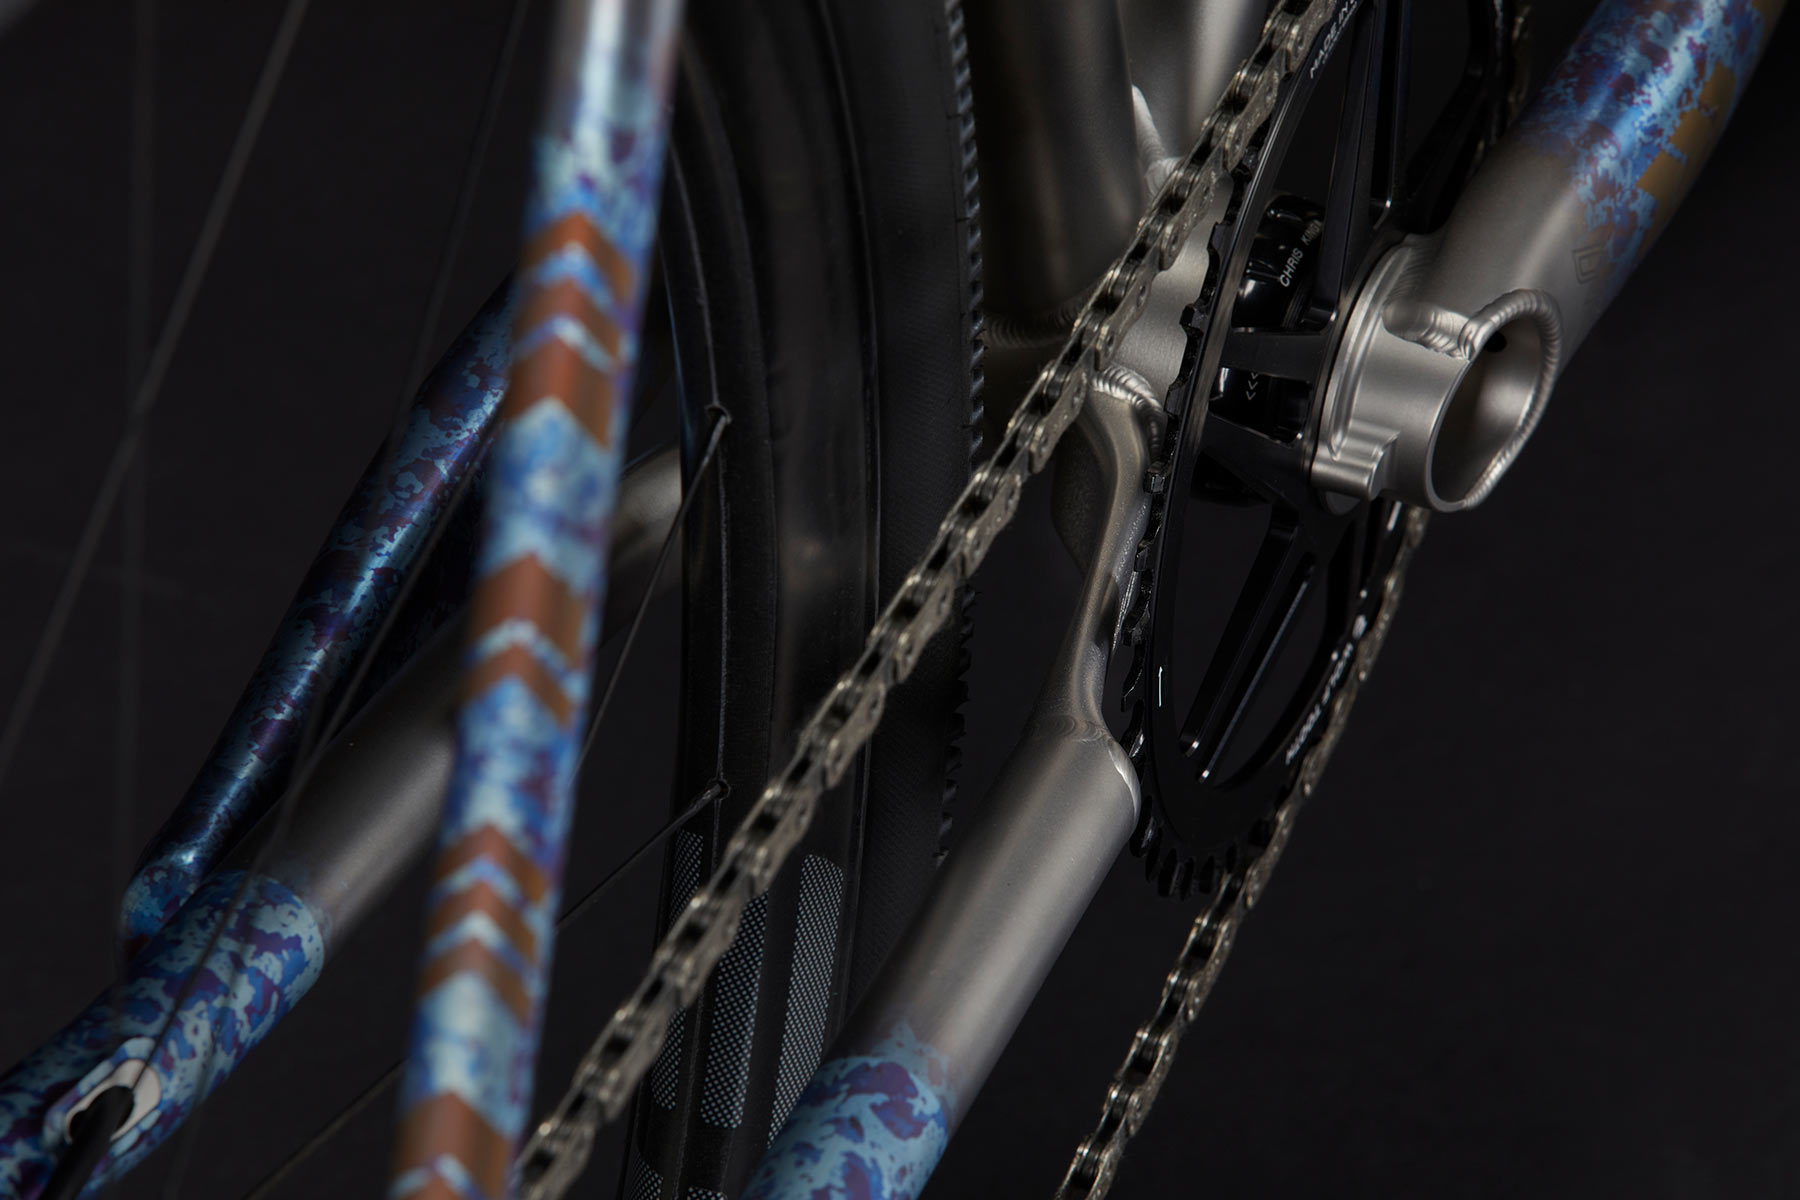 closeup details of sage titanium storm king gravel bike with 3D printed chainstay yoke and dropouts